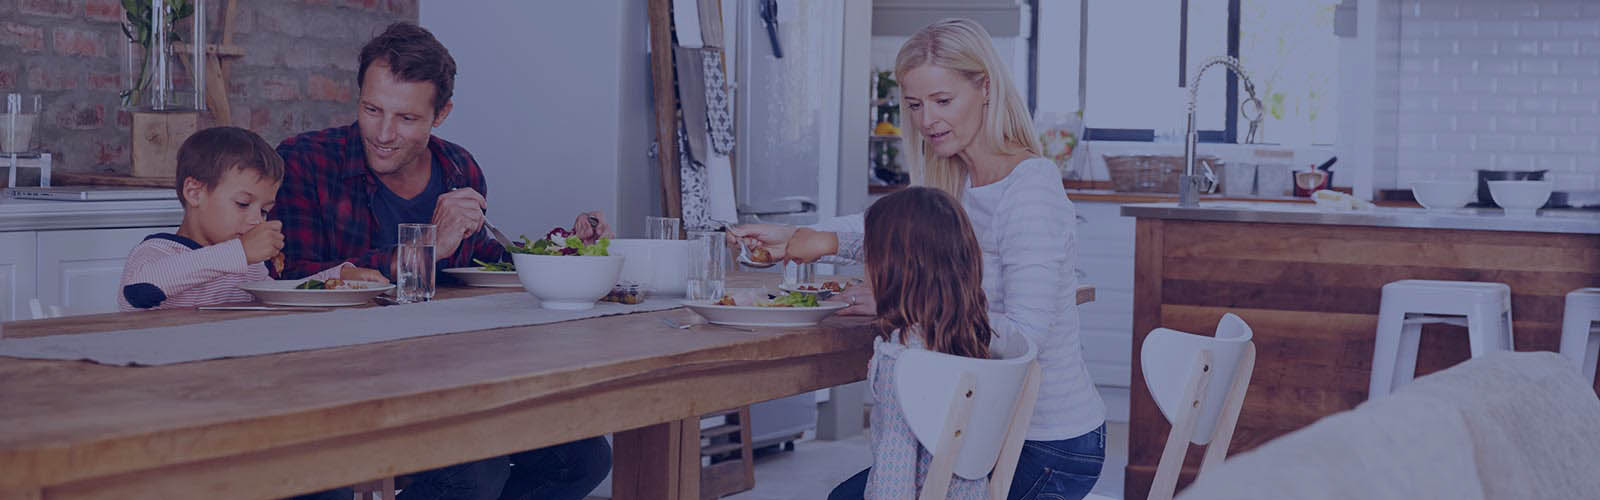 Have equity in your home? Learn how Pennymac can help you make home improvements or pay off high interest debt with a cash-out refinance loan.